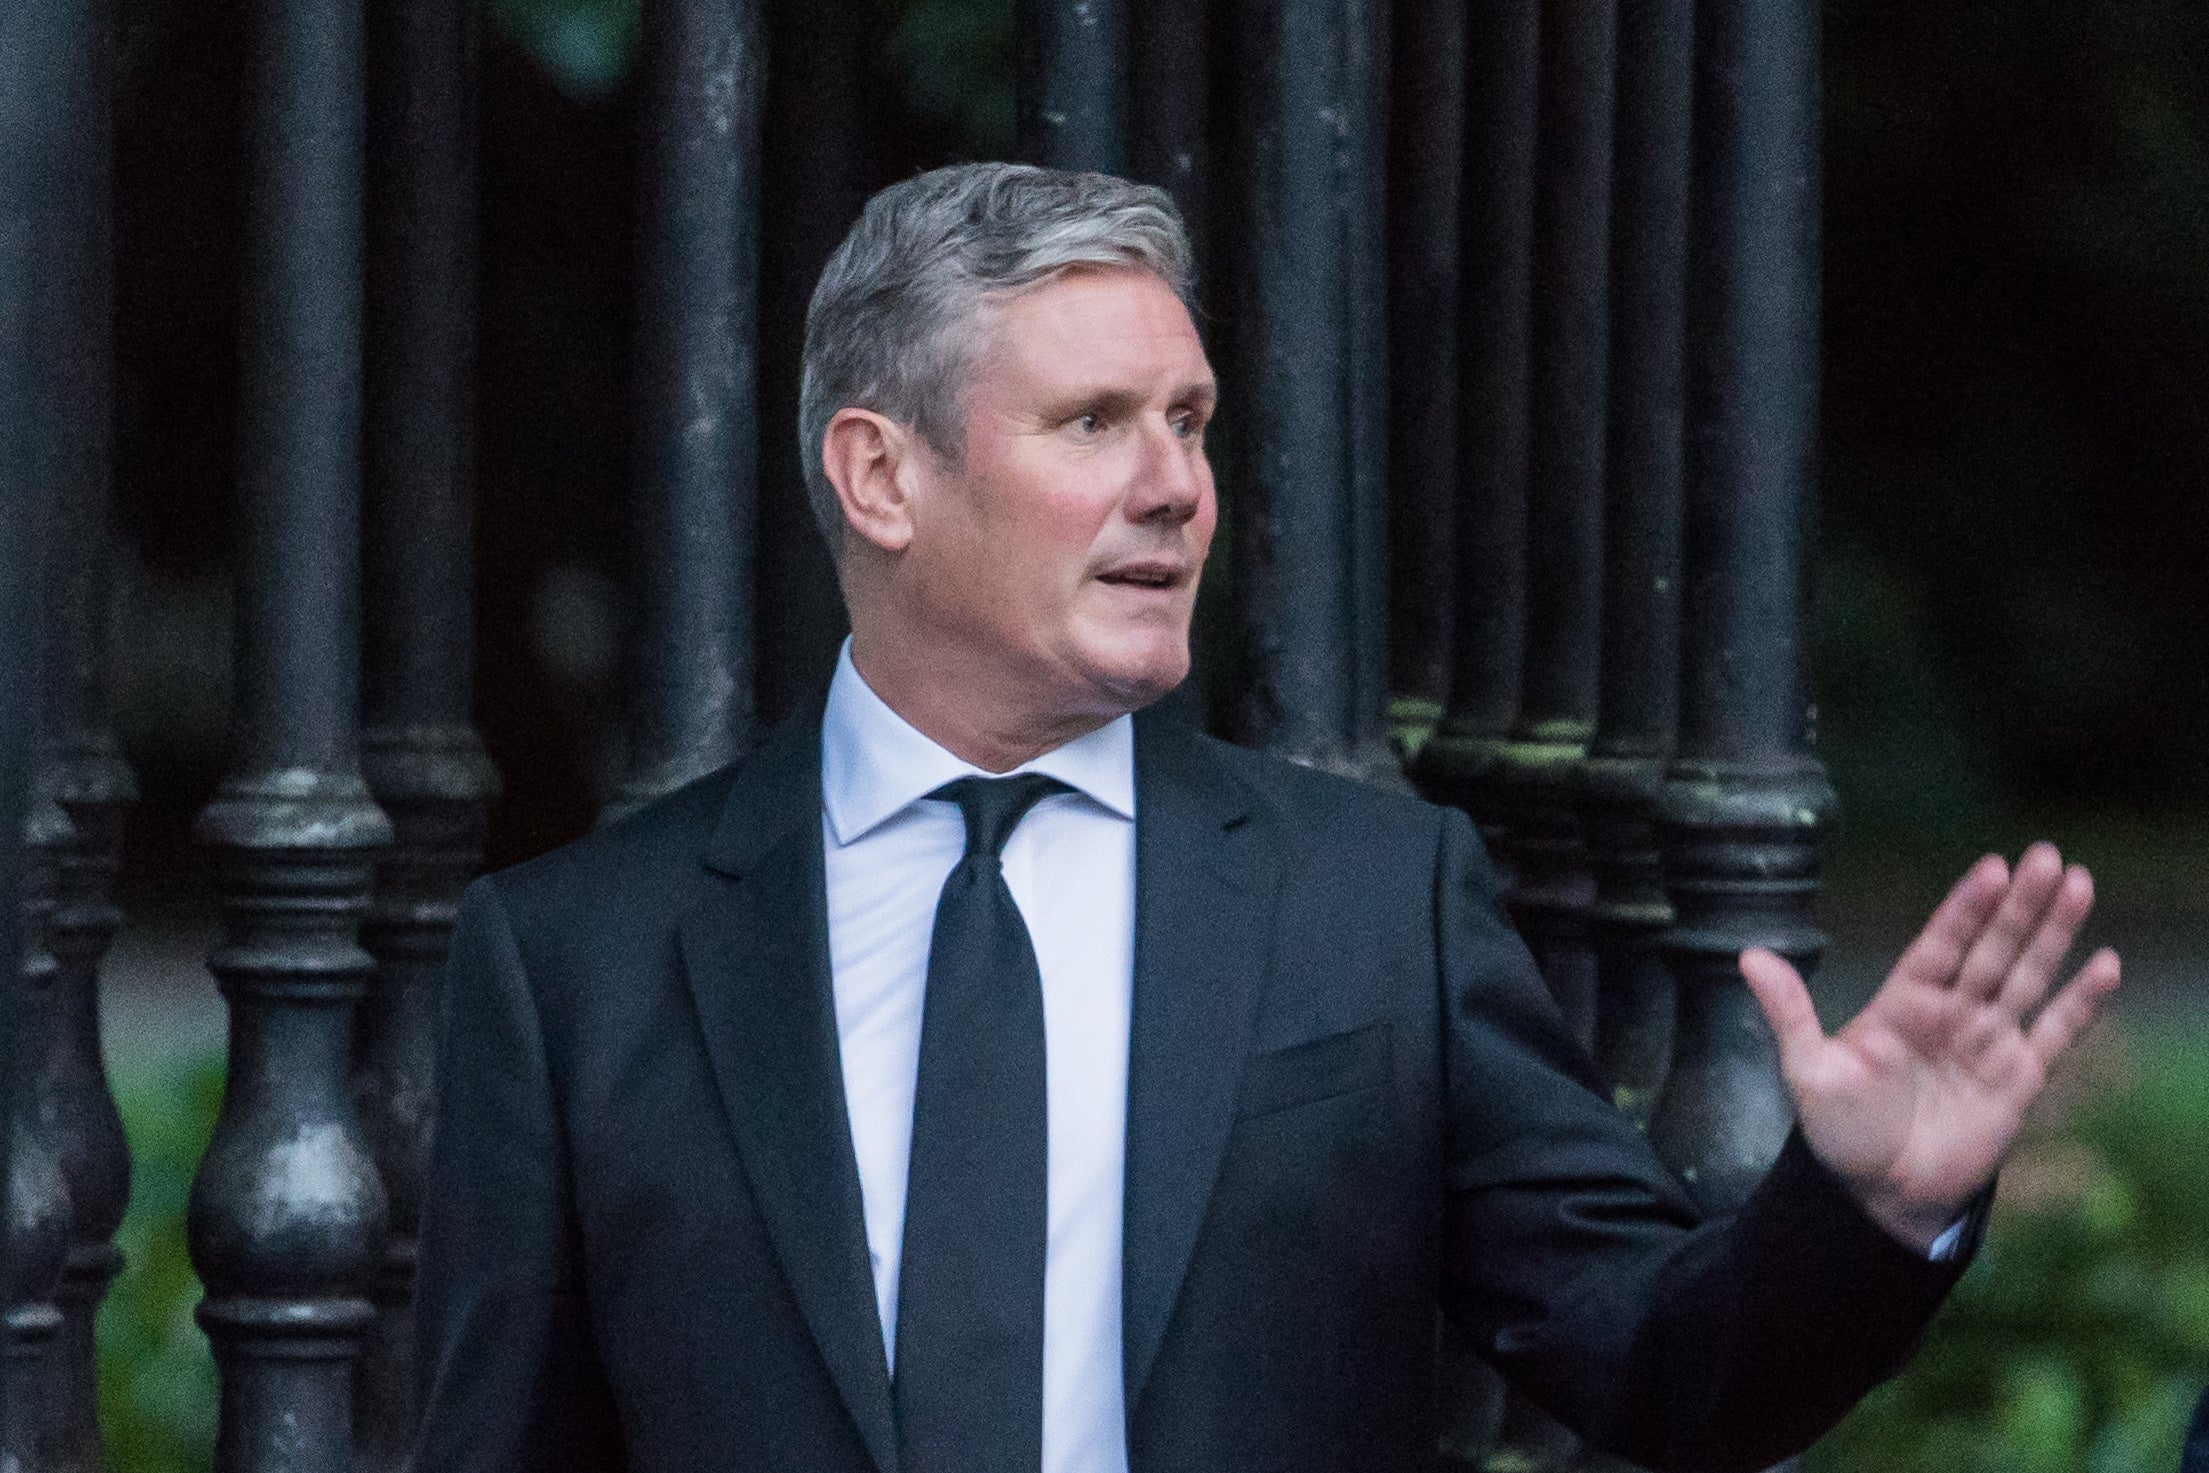 independent.co.uk - Rob Merrick - Labour group tells Keir Starmer to end Brexit silence by backing new deals with EU